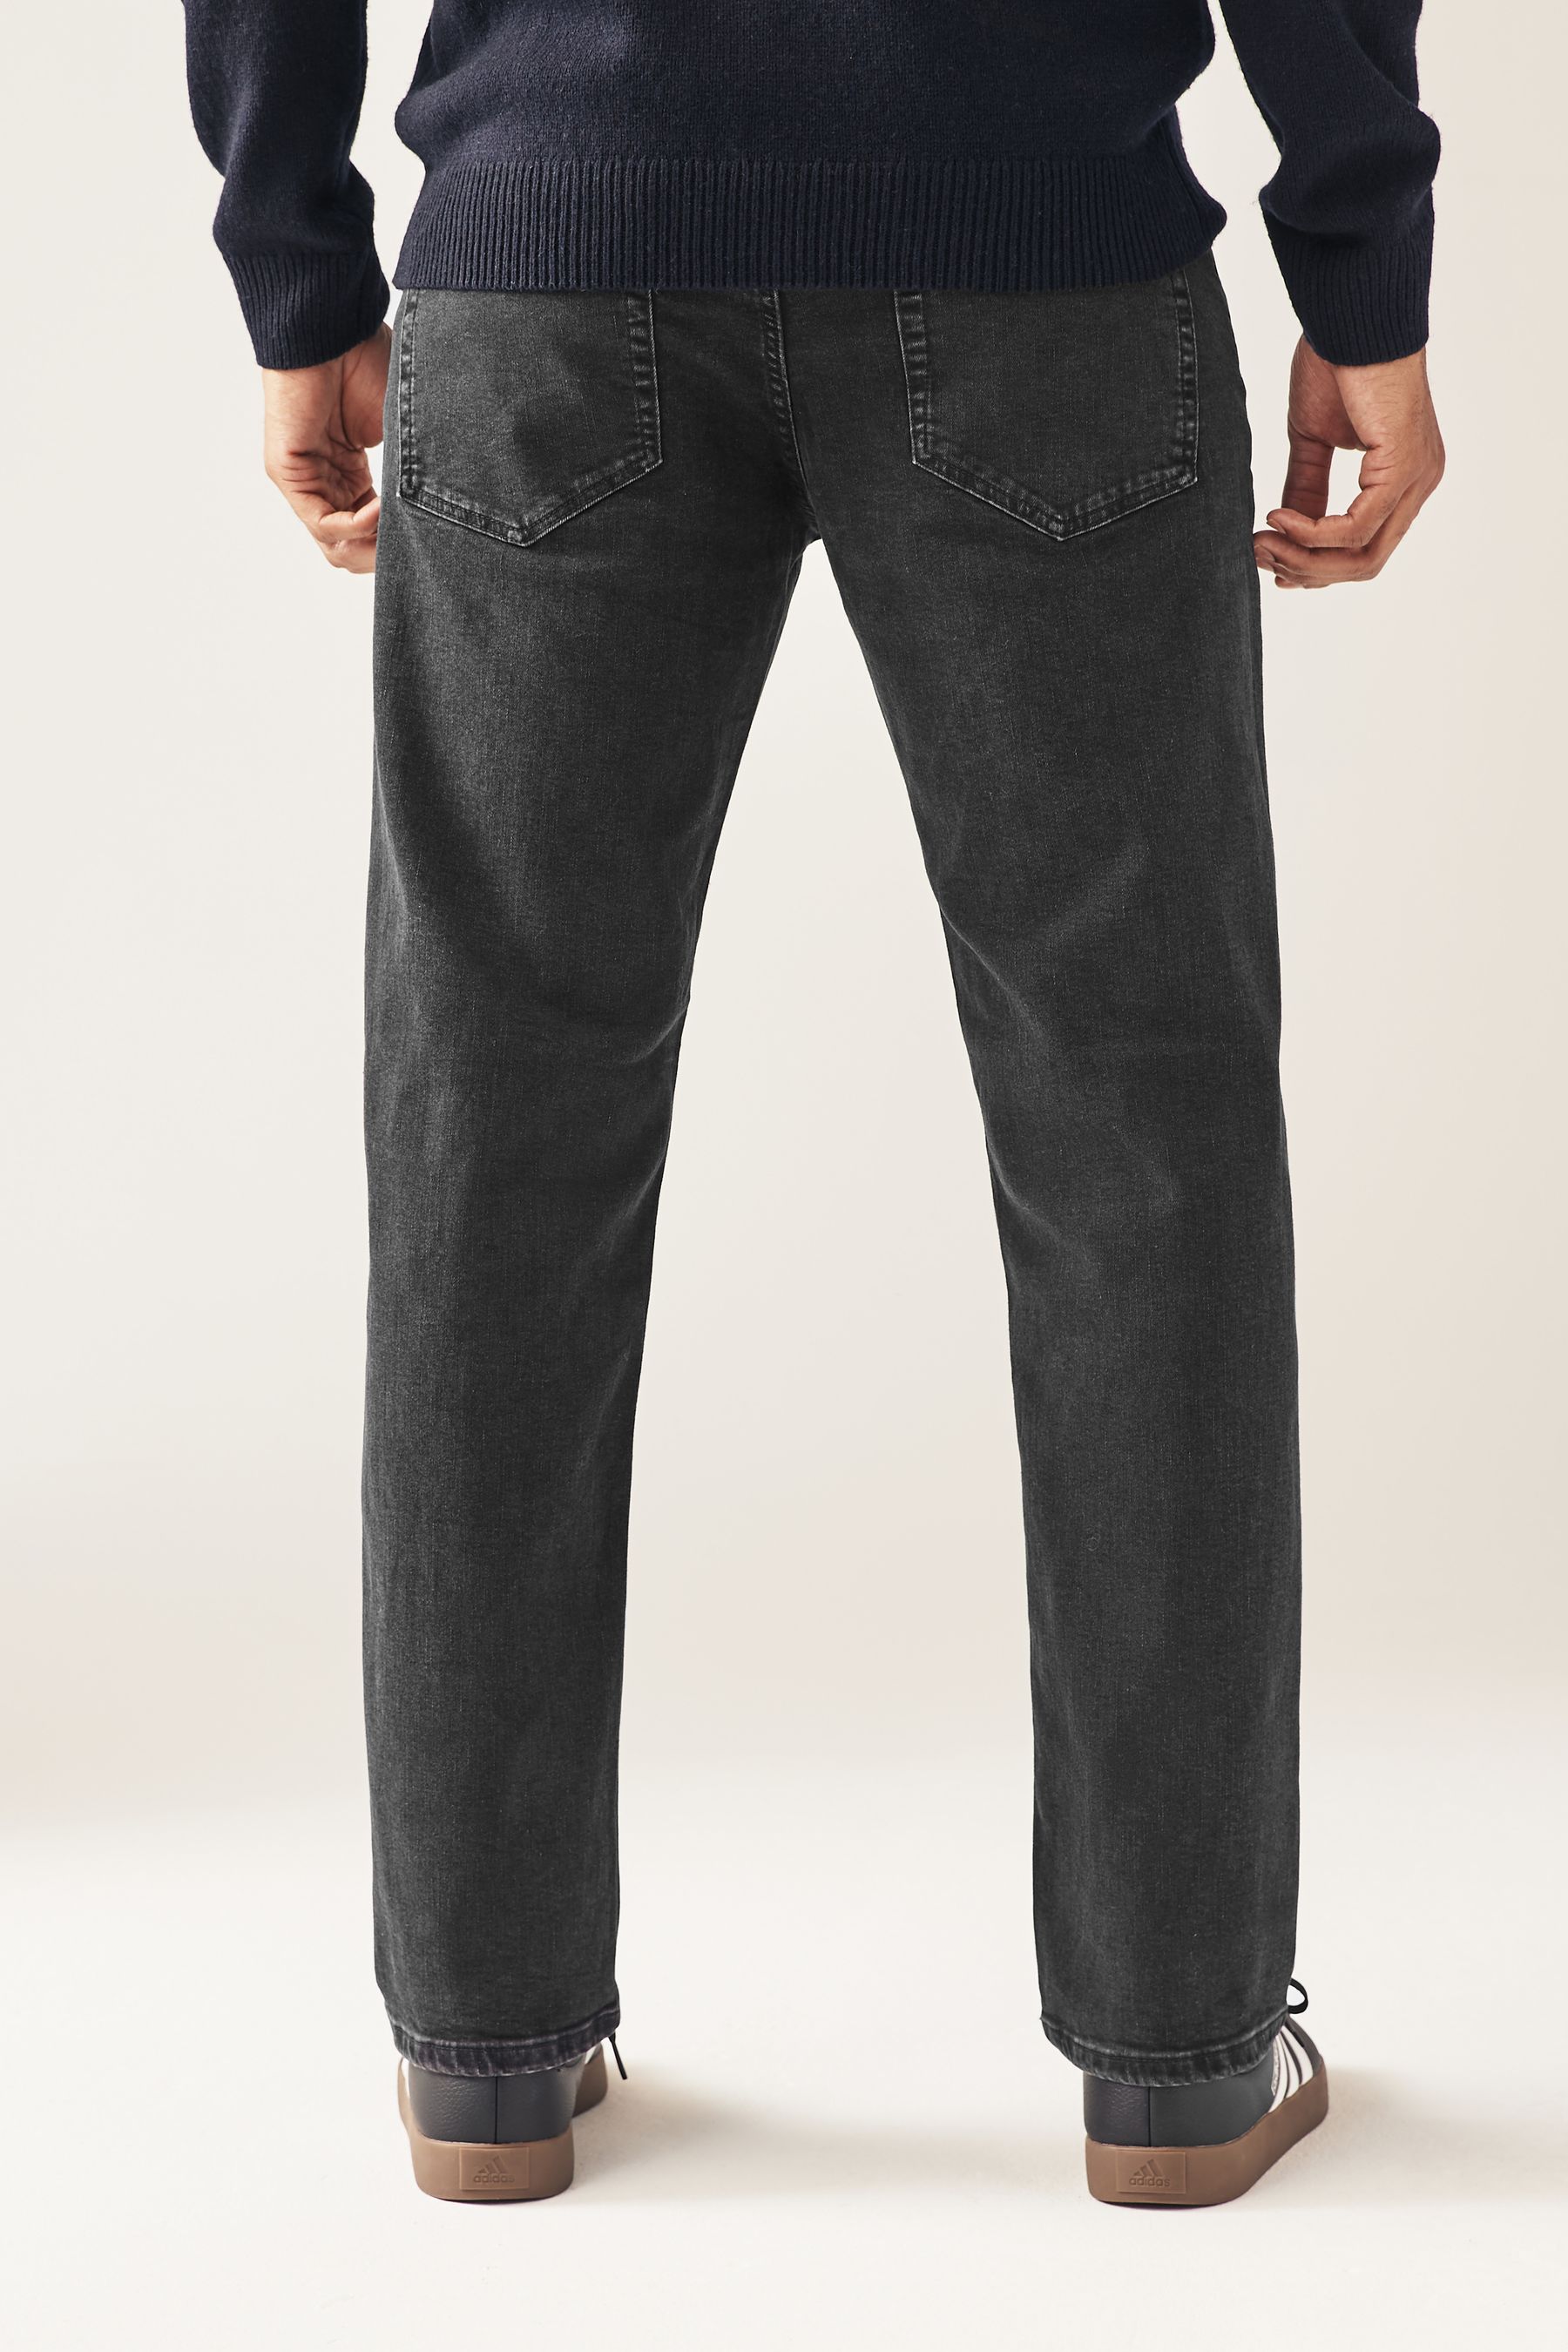 Buy Stretch Jeans from the Next UK online shop